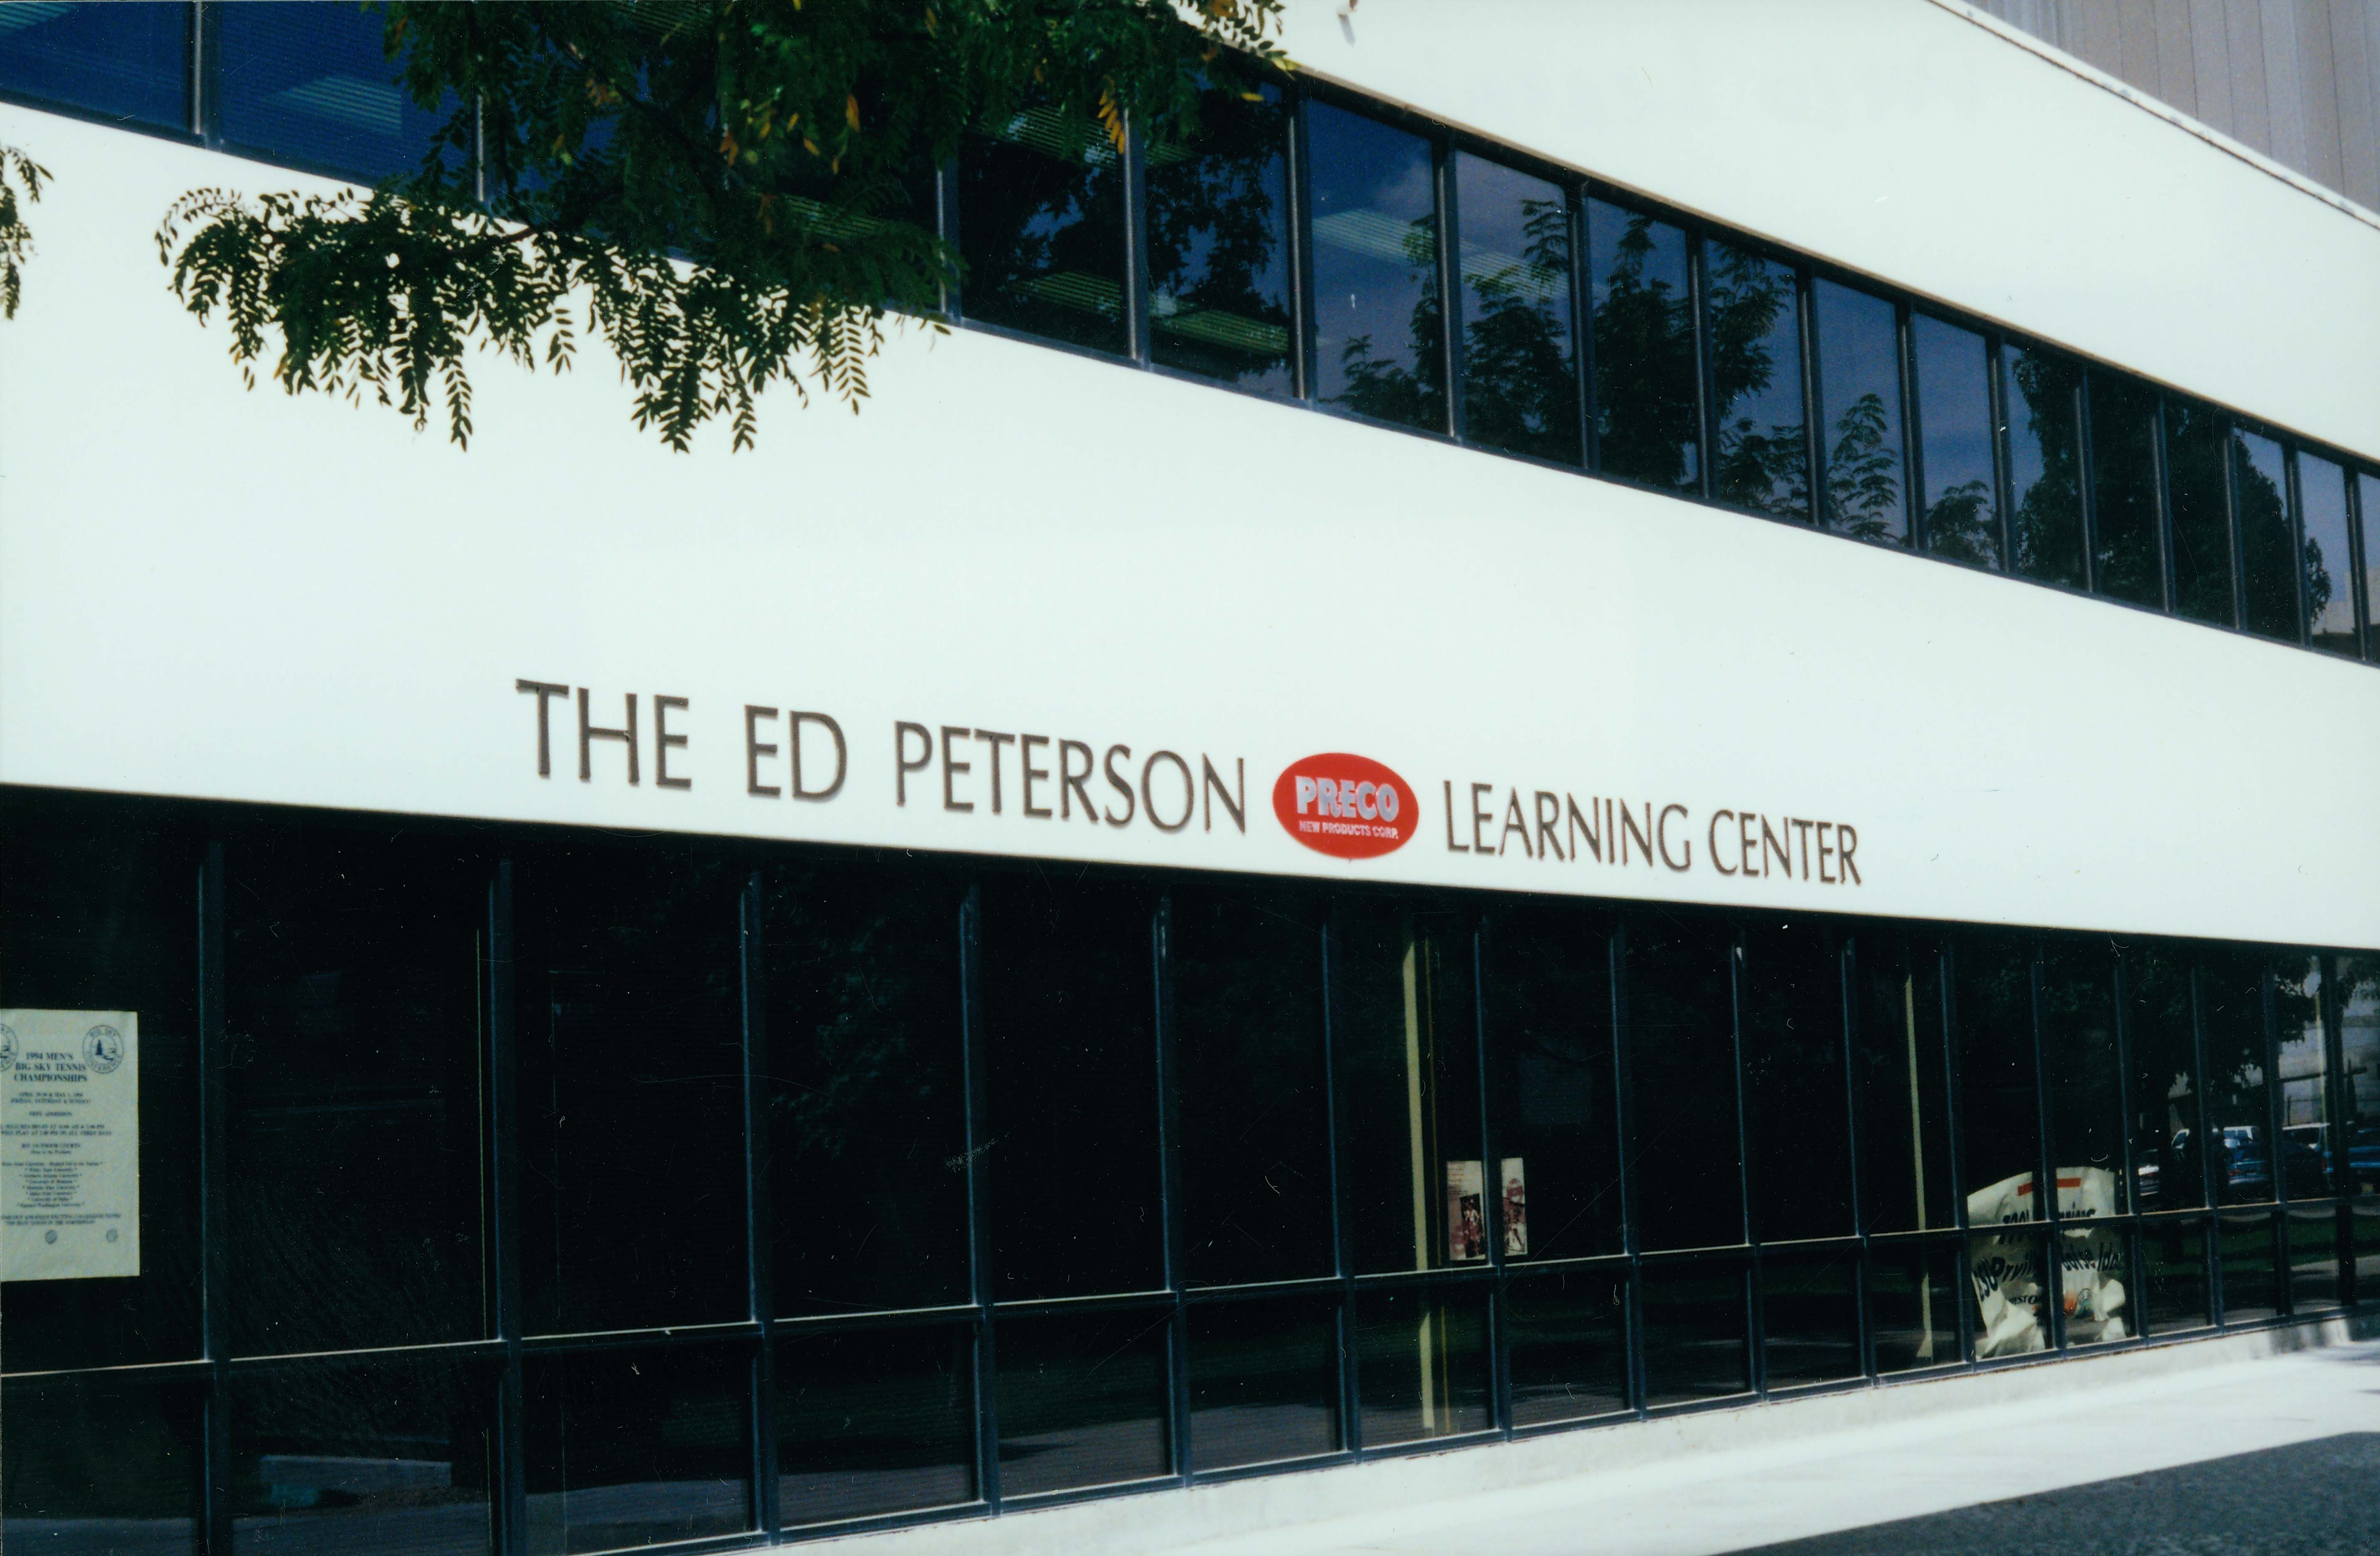 Ed Peterson - Preco Learning Center exterior